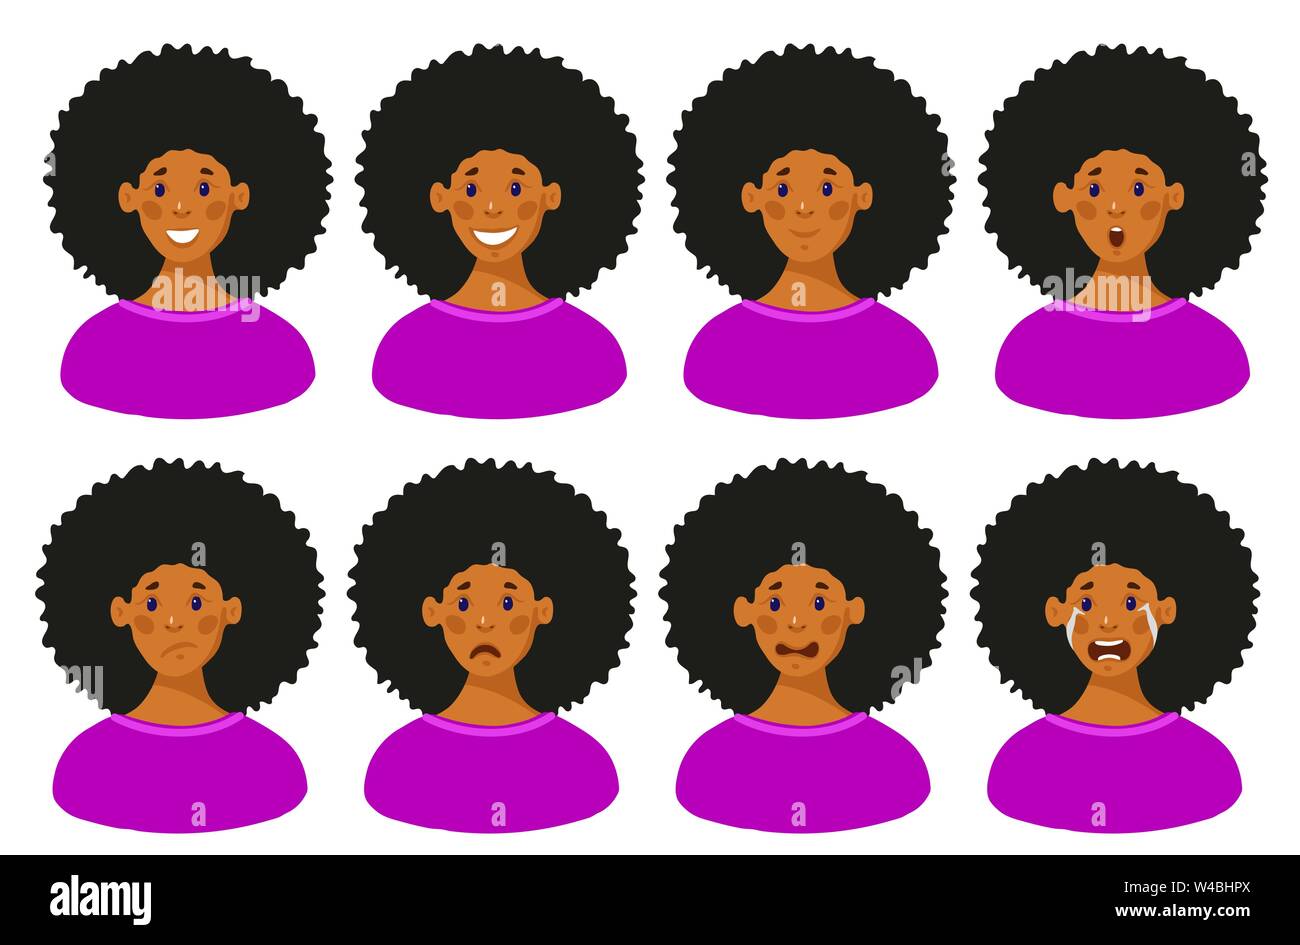 Set of 8 female emotions. African American teen face expression. Emotional intelligence. Head of a young girl with different emotions on her face. Avatar girl. Flat design vector illustration. Stock Vector